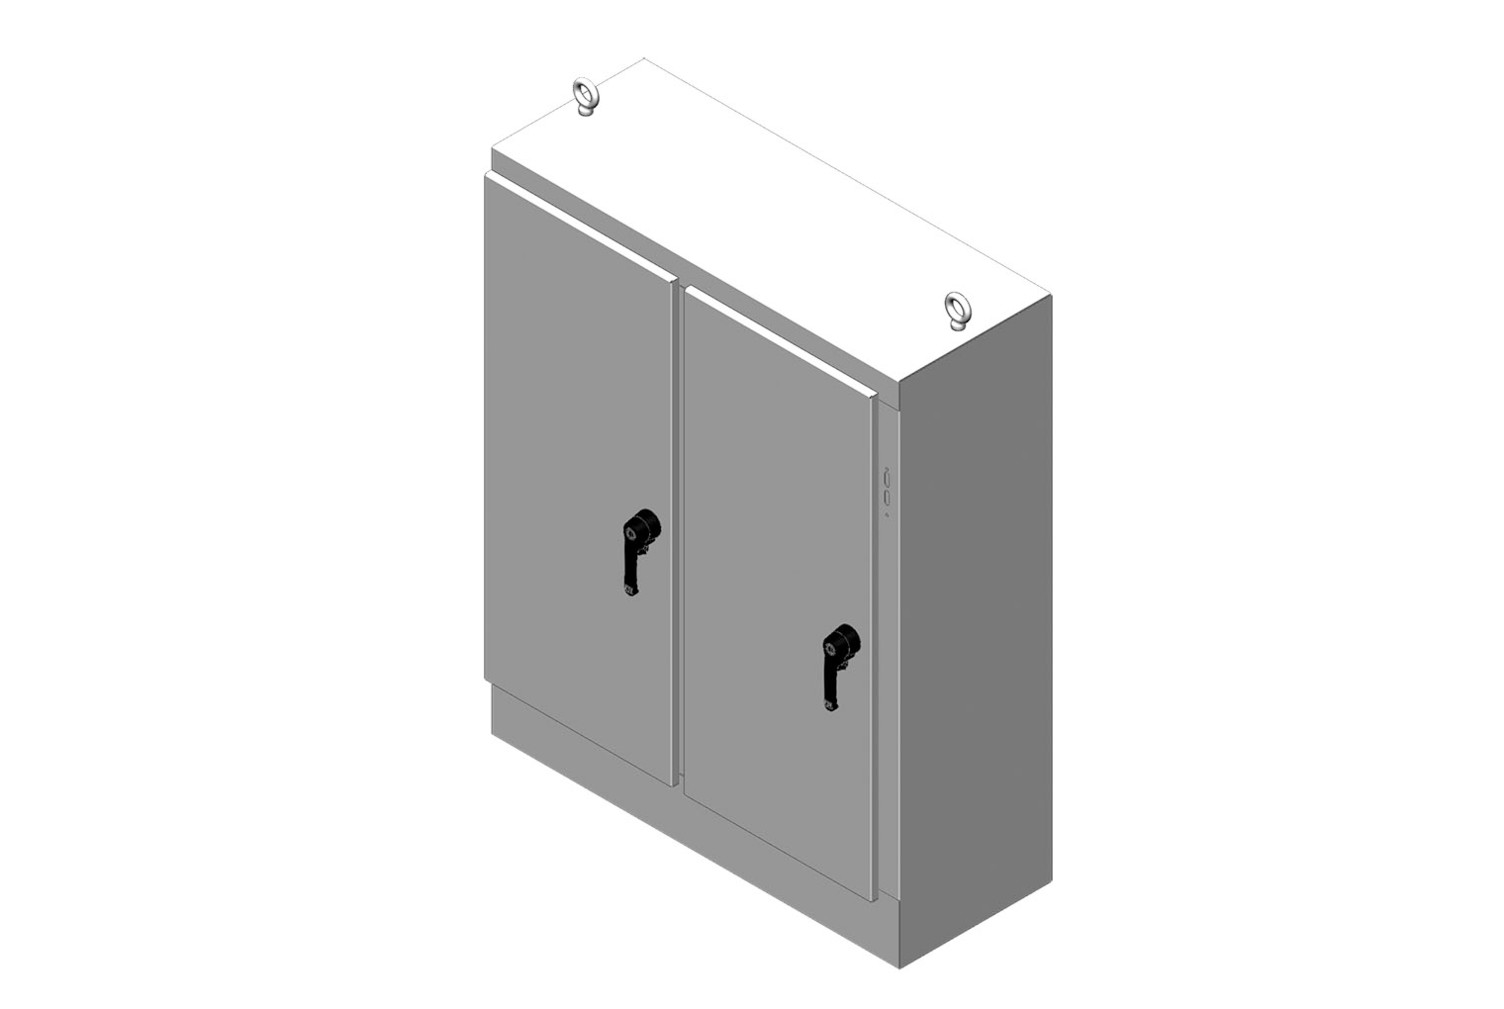 RMR Free-Standing Disconnect Enclosure, Type 4, with Solid Double Door - Image 0 - Large